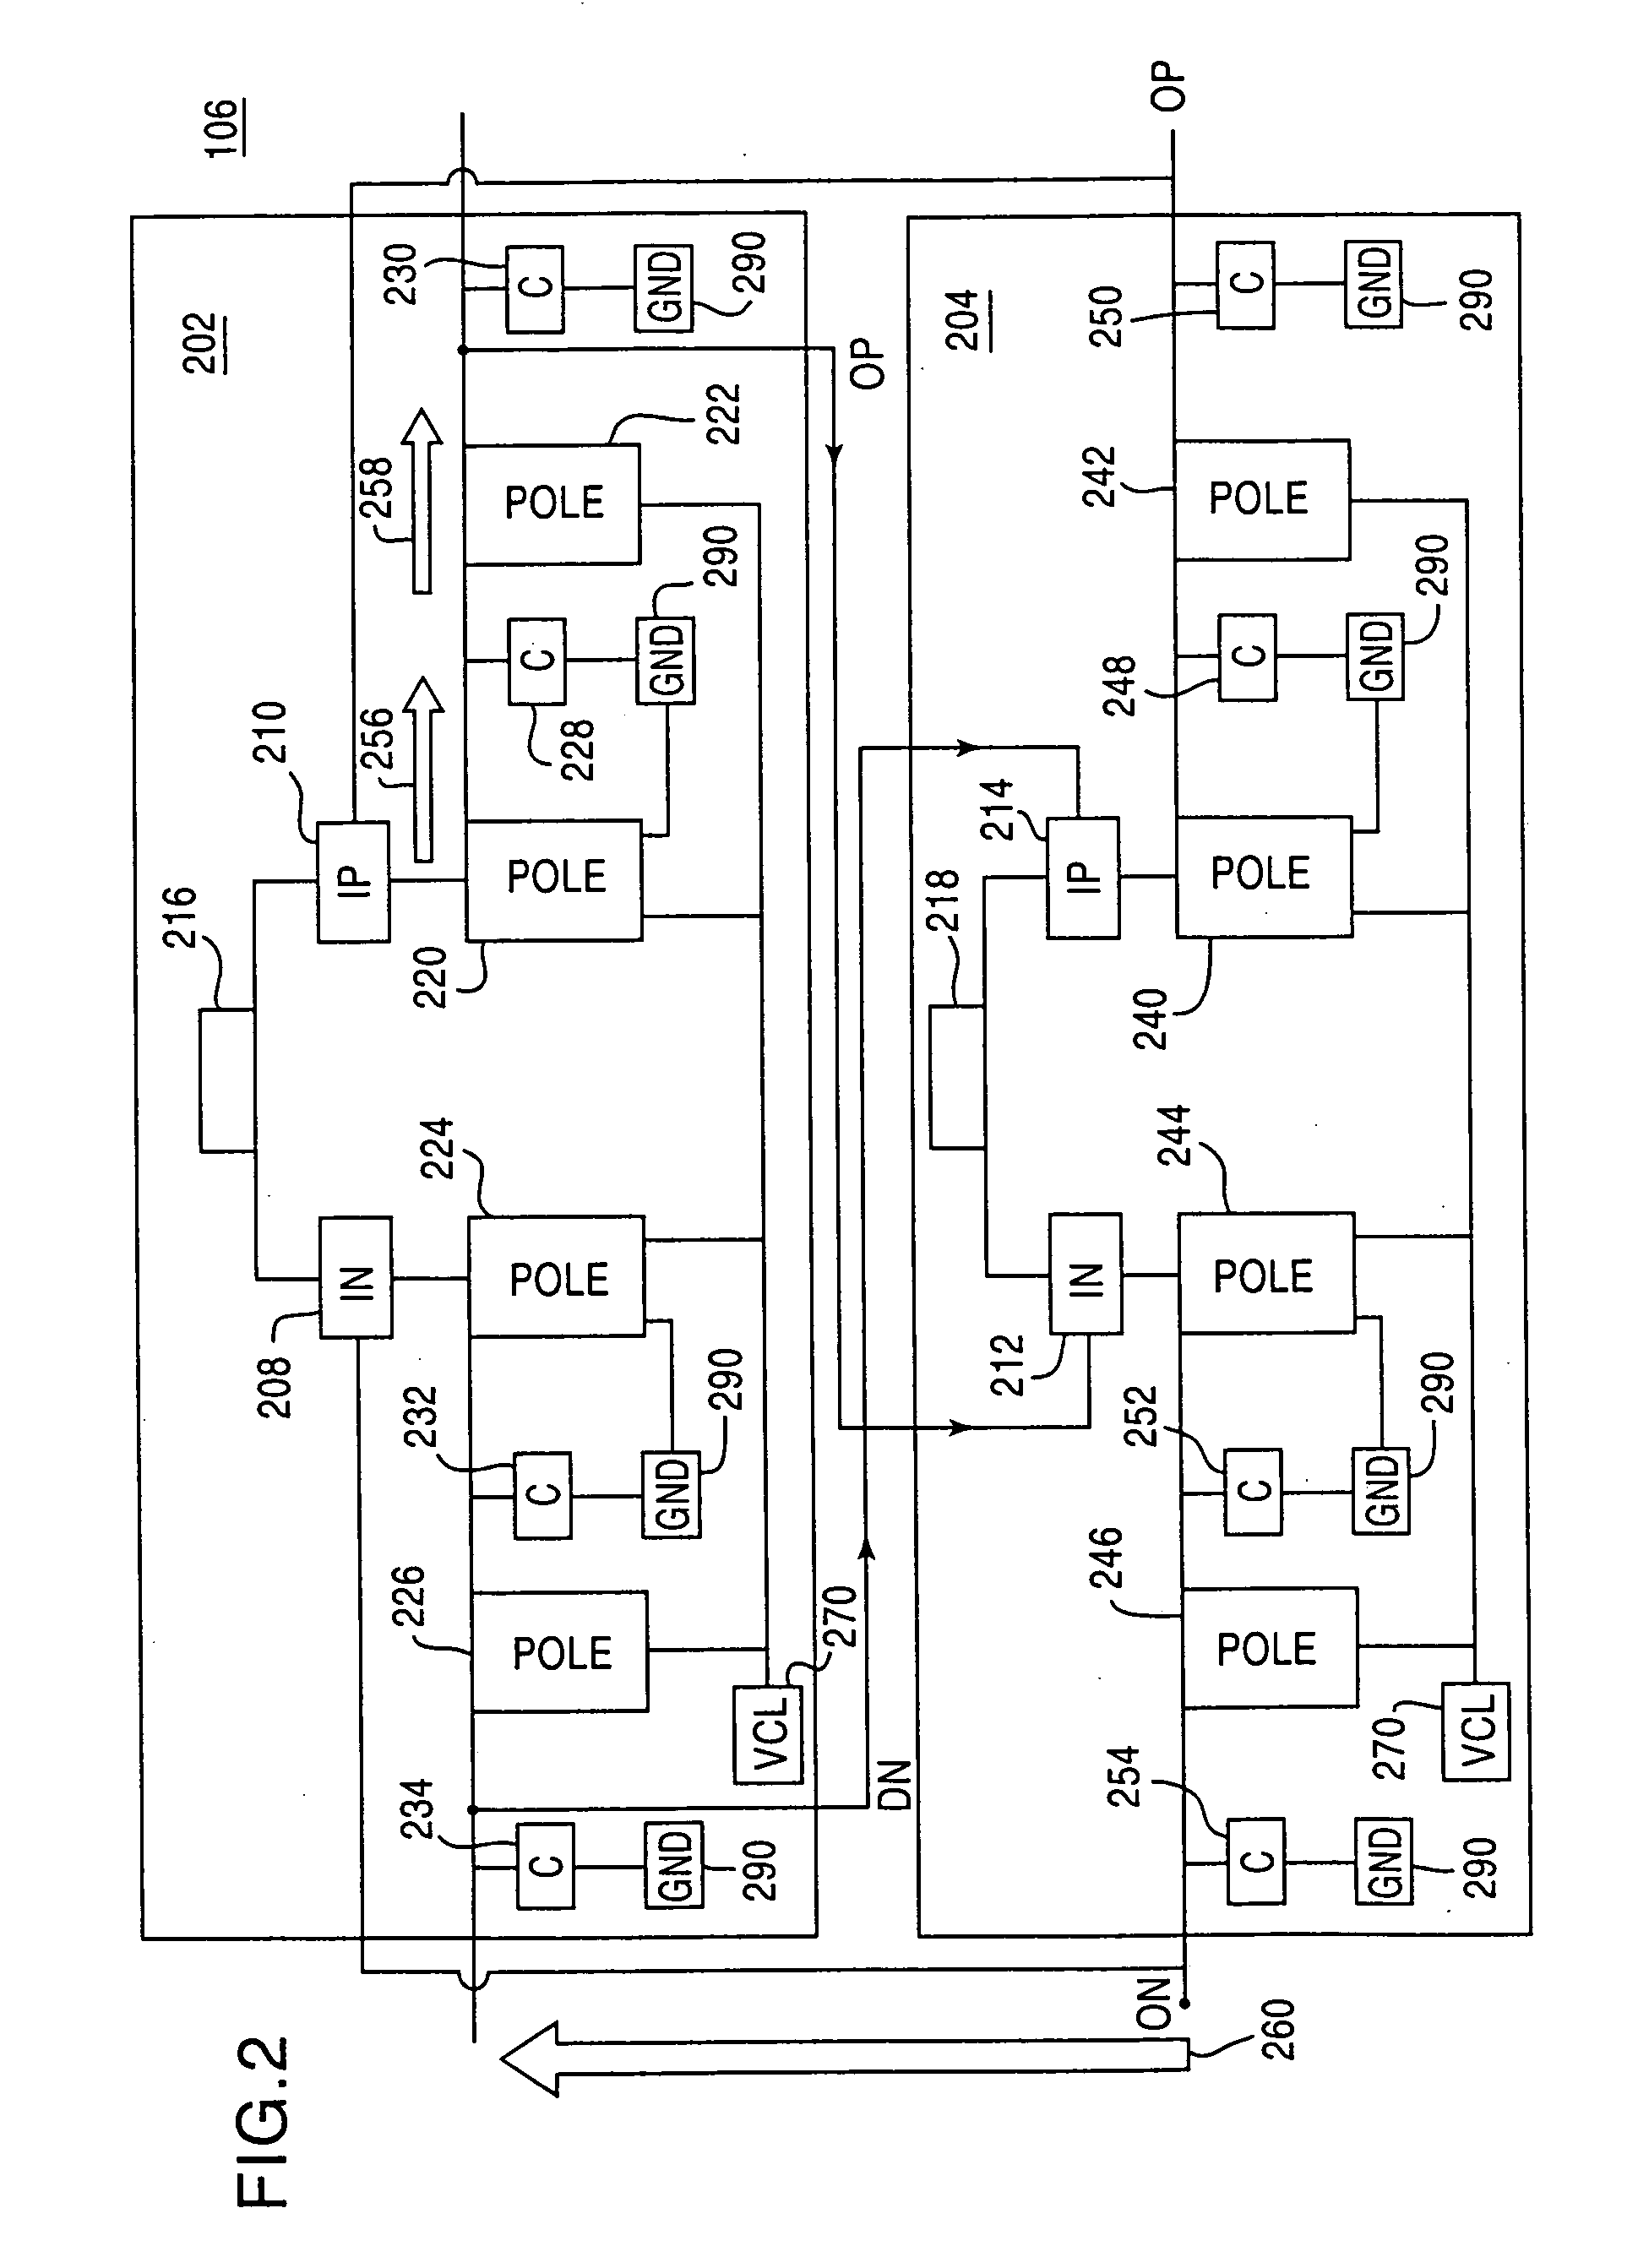 Oscillator with quadrature output in a cross-coupled configuration